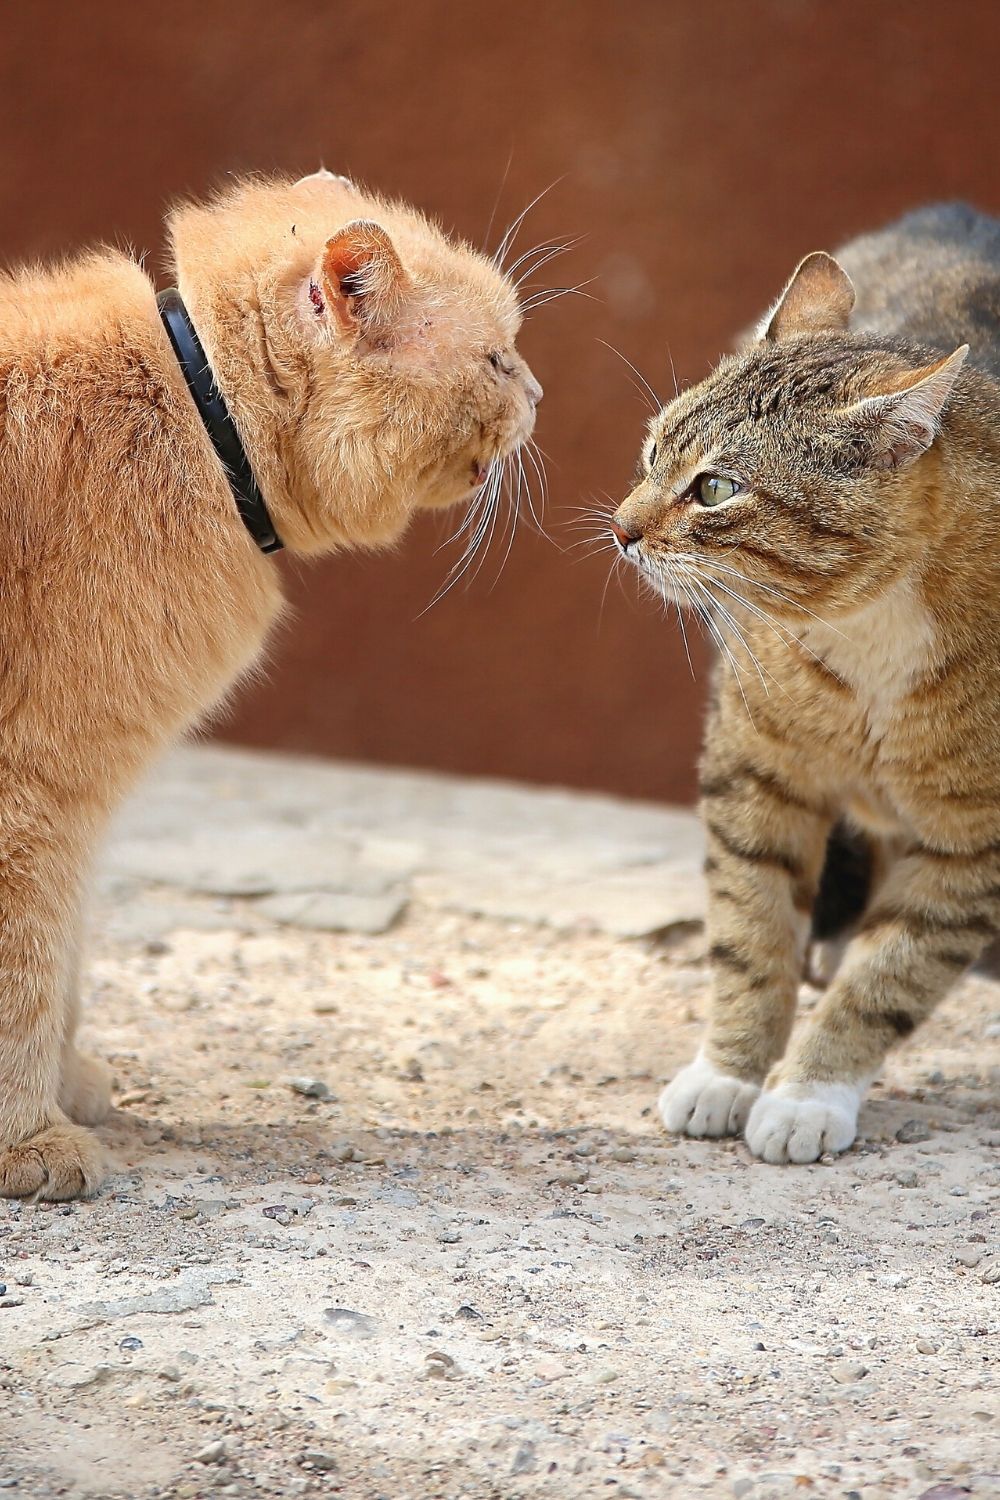 Hissing, growling, and puffing up fur are some of the warning signs when introducing cats